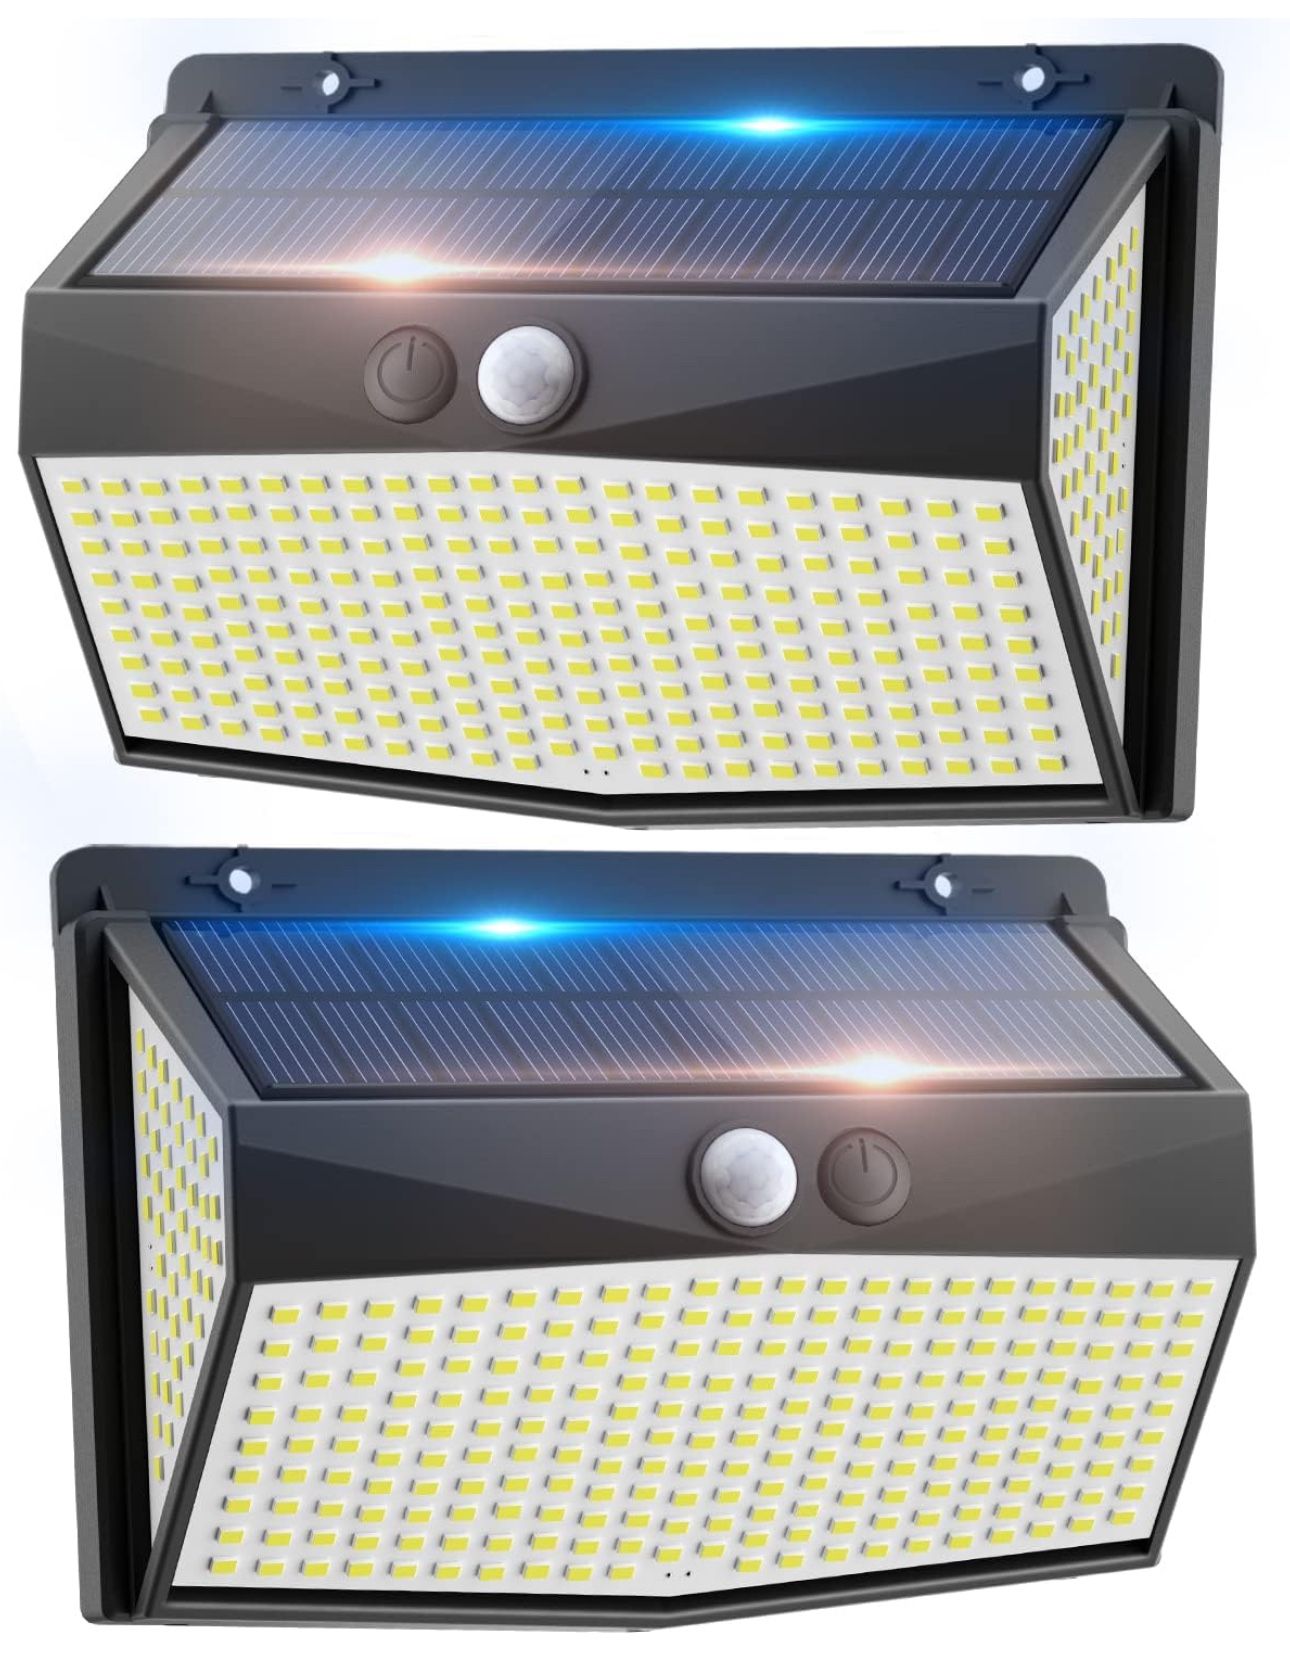 318 LED Solar Motion Sensor Lights Outdoor with 3 Lighting Modes, 270° Wide Angle Lighting, IP67 Waterproof. Wireless Security Solar Powered Flood Lig